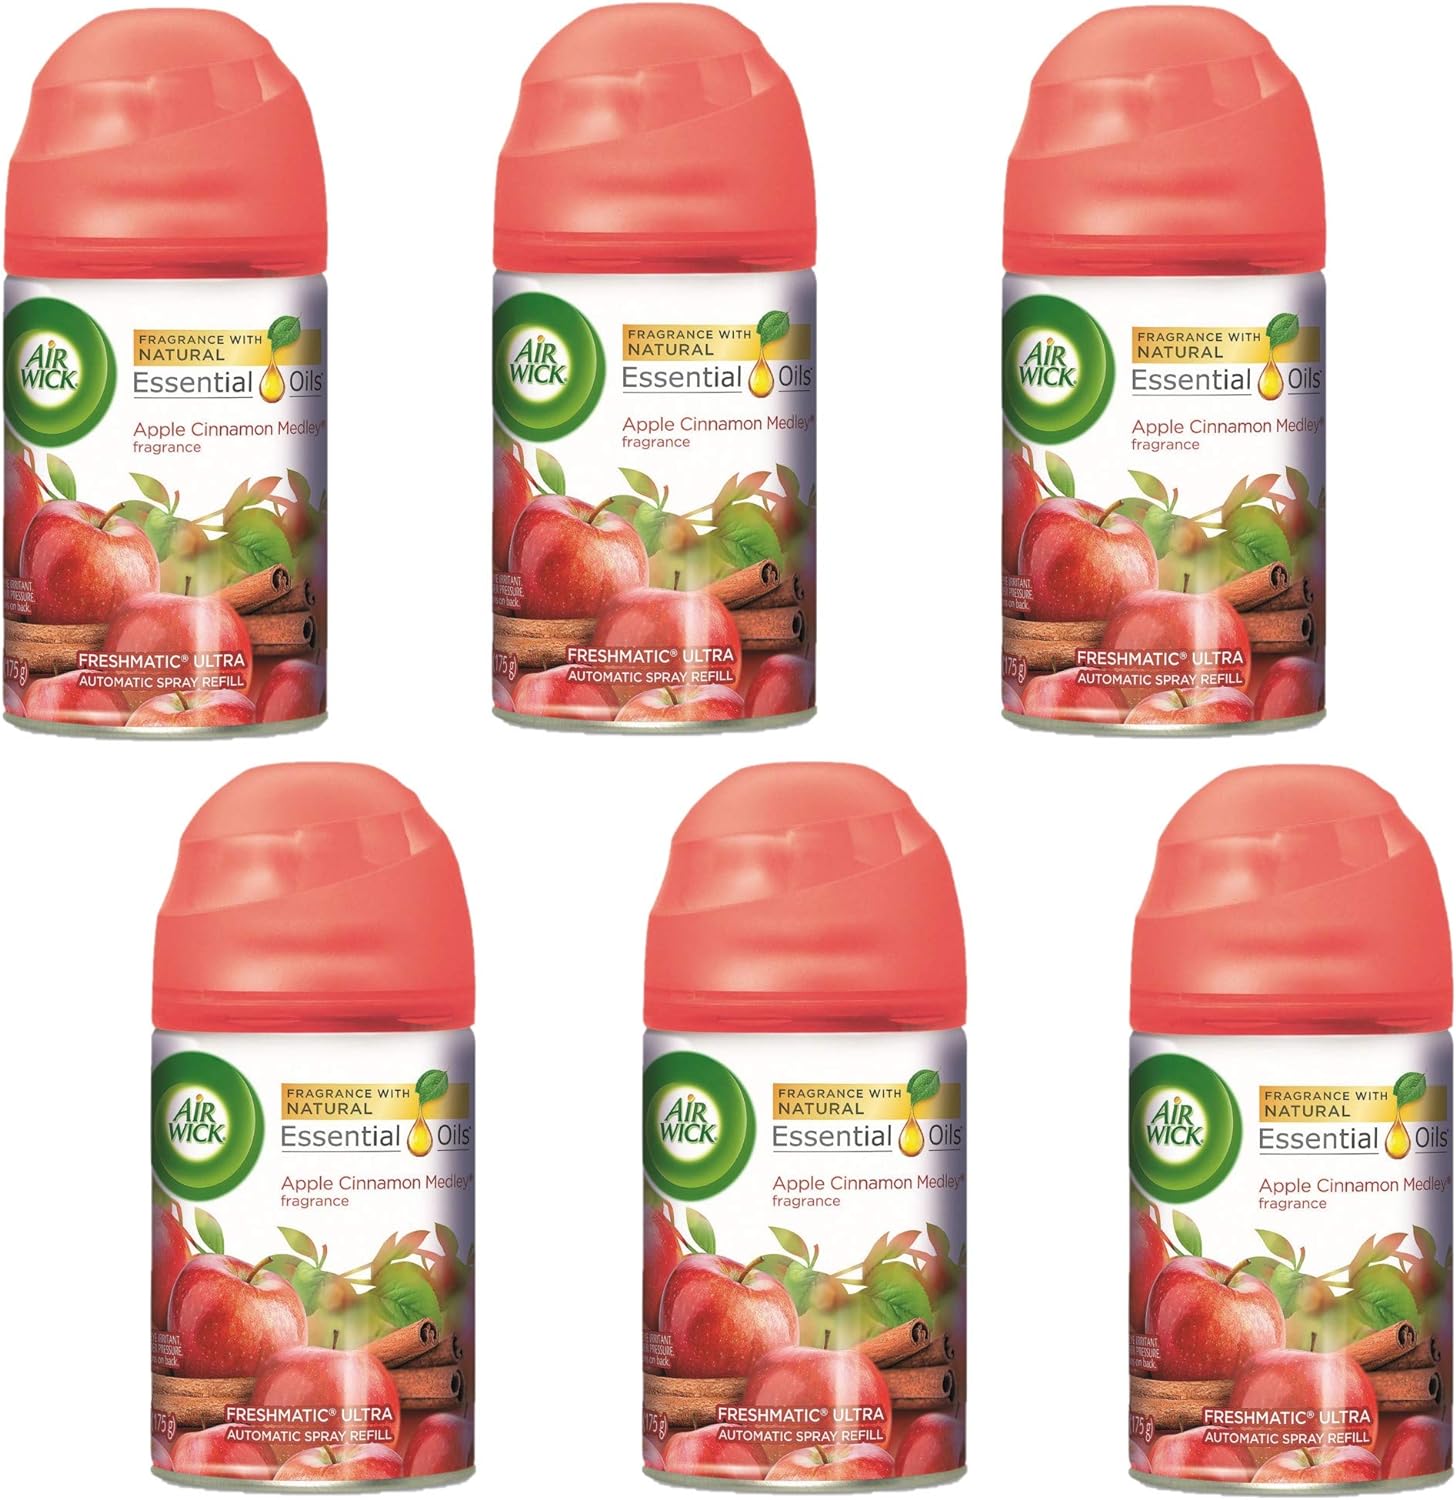 Air Wick Freshmatic Automatic Spray Air Freshener, Apple Cinnamon Medley Scent, 1 Refill, 6.17 Ounce (Pack of 6) : Health & Household